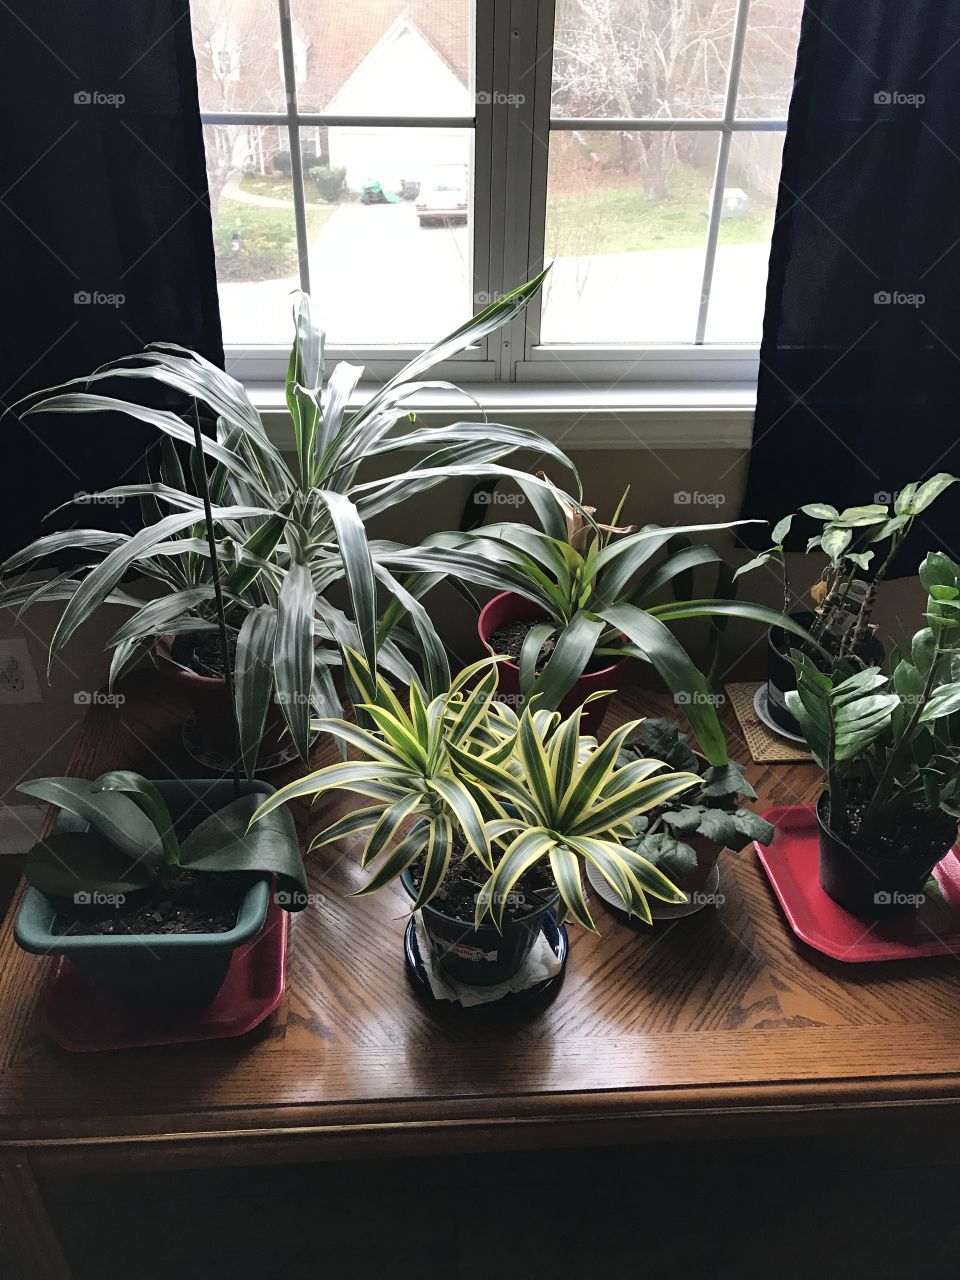 Table of plants in pots